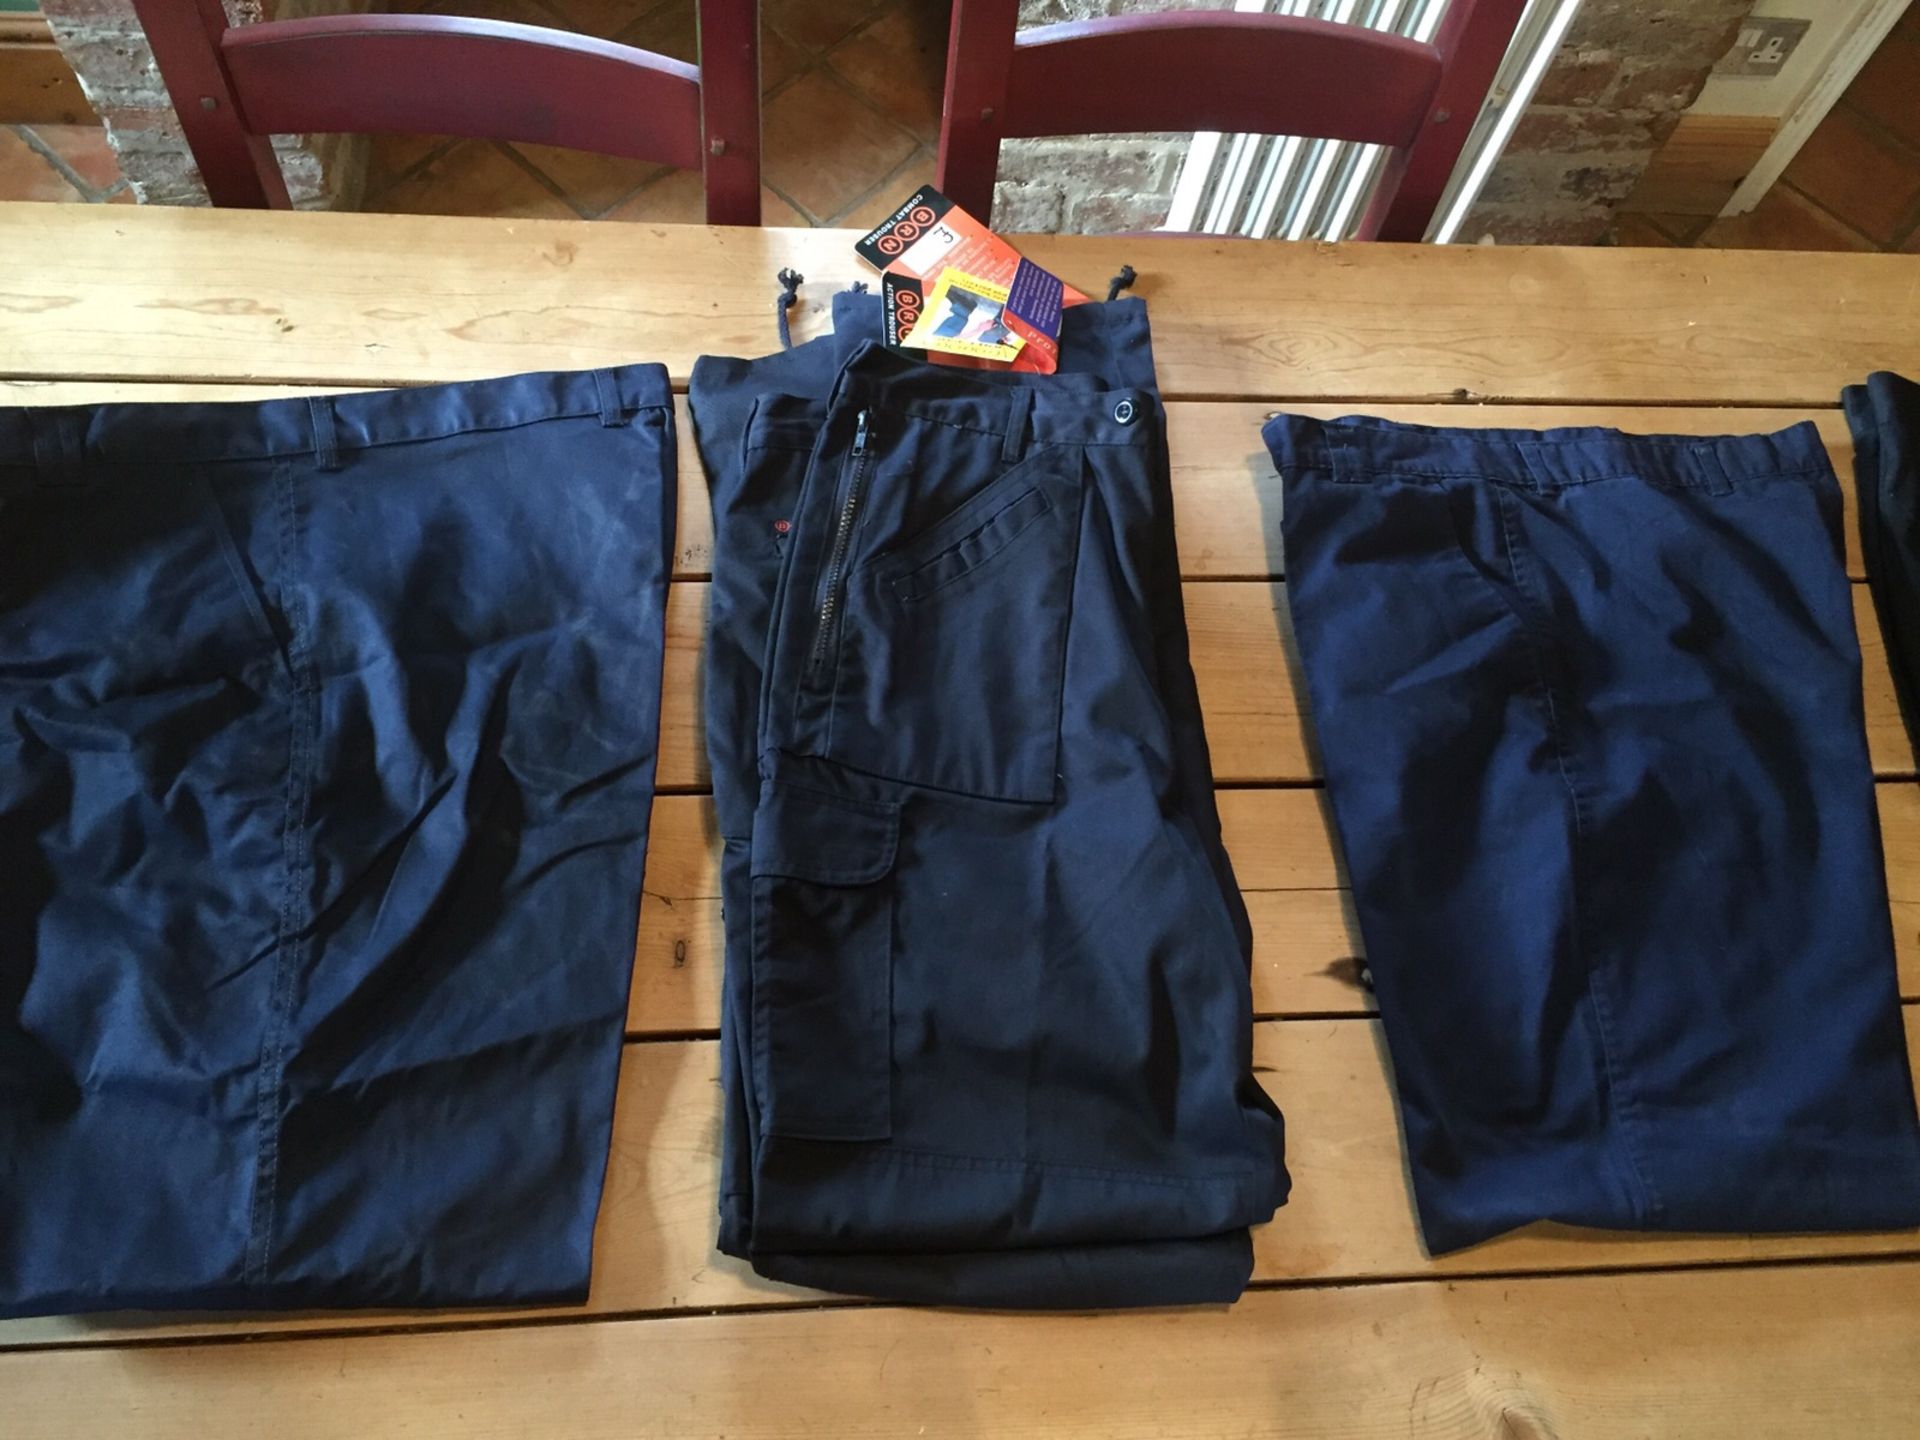 Job Lot 62 Pairs of Brand New mens UNEEK work trousers various sizes in blue